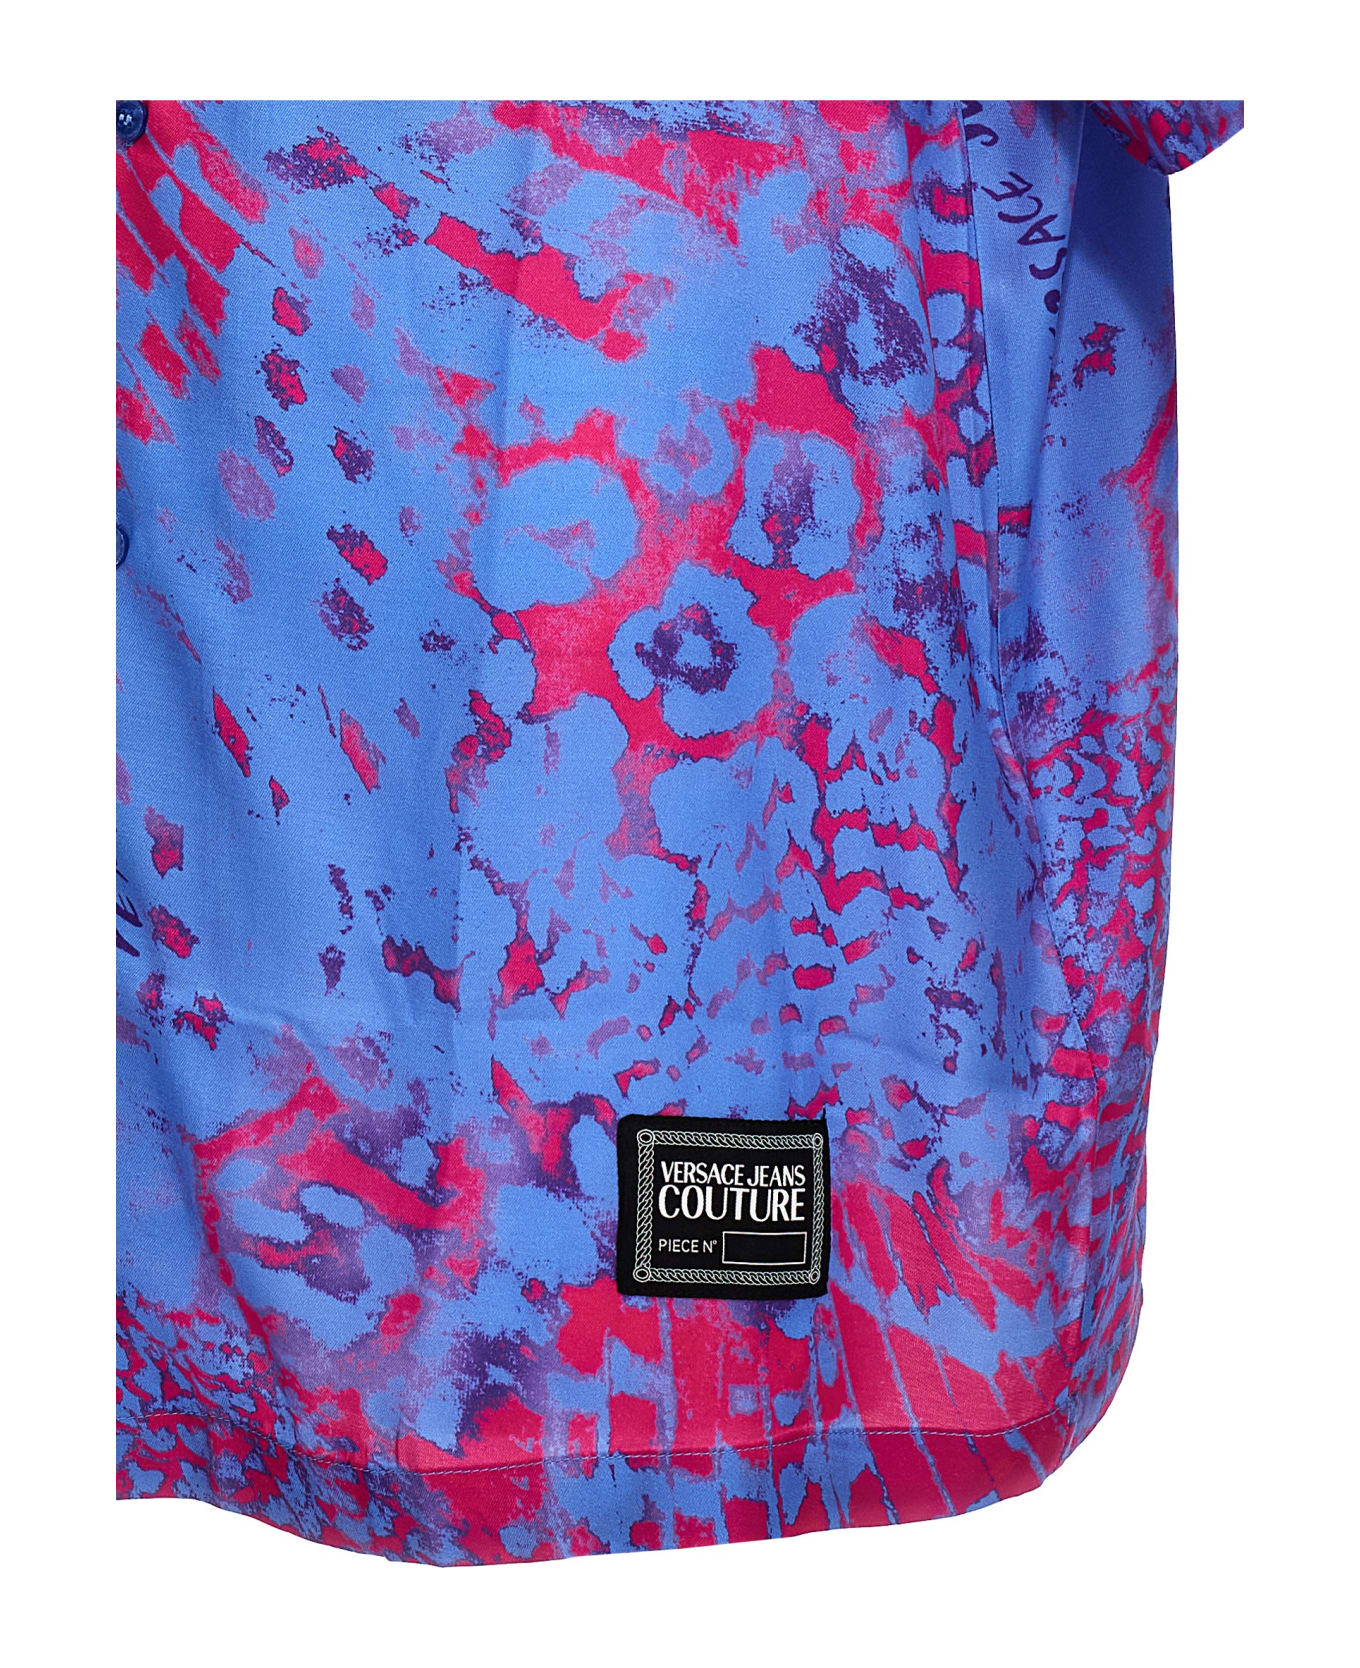 Versace Jeans Couture Bowling All Over Shirt - Cerulean